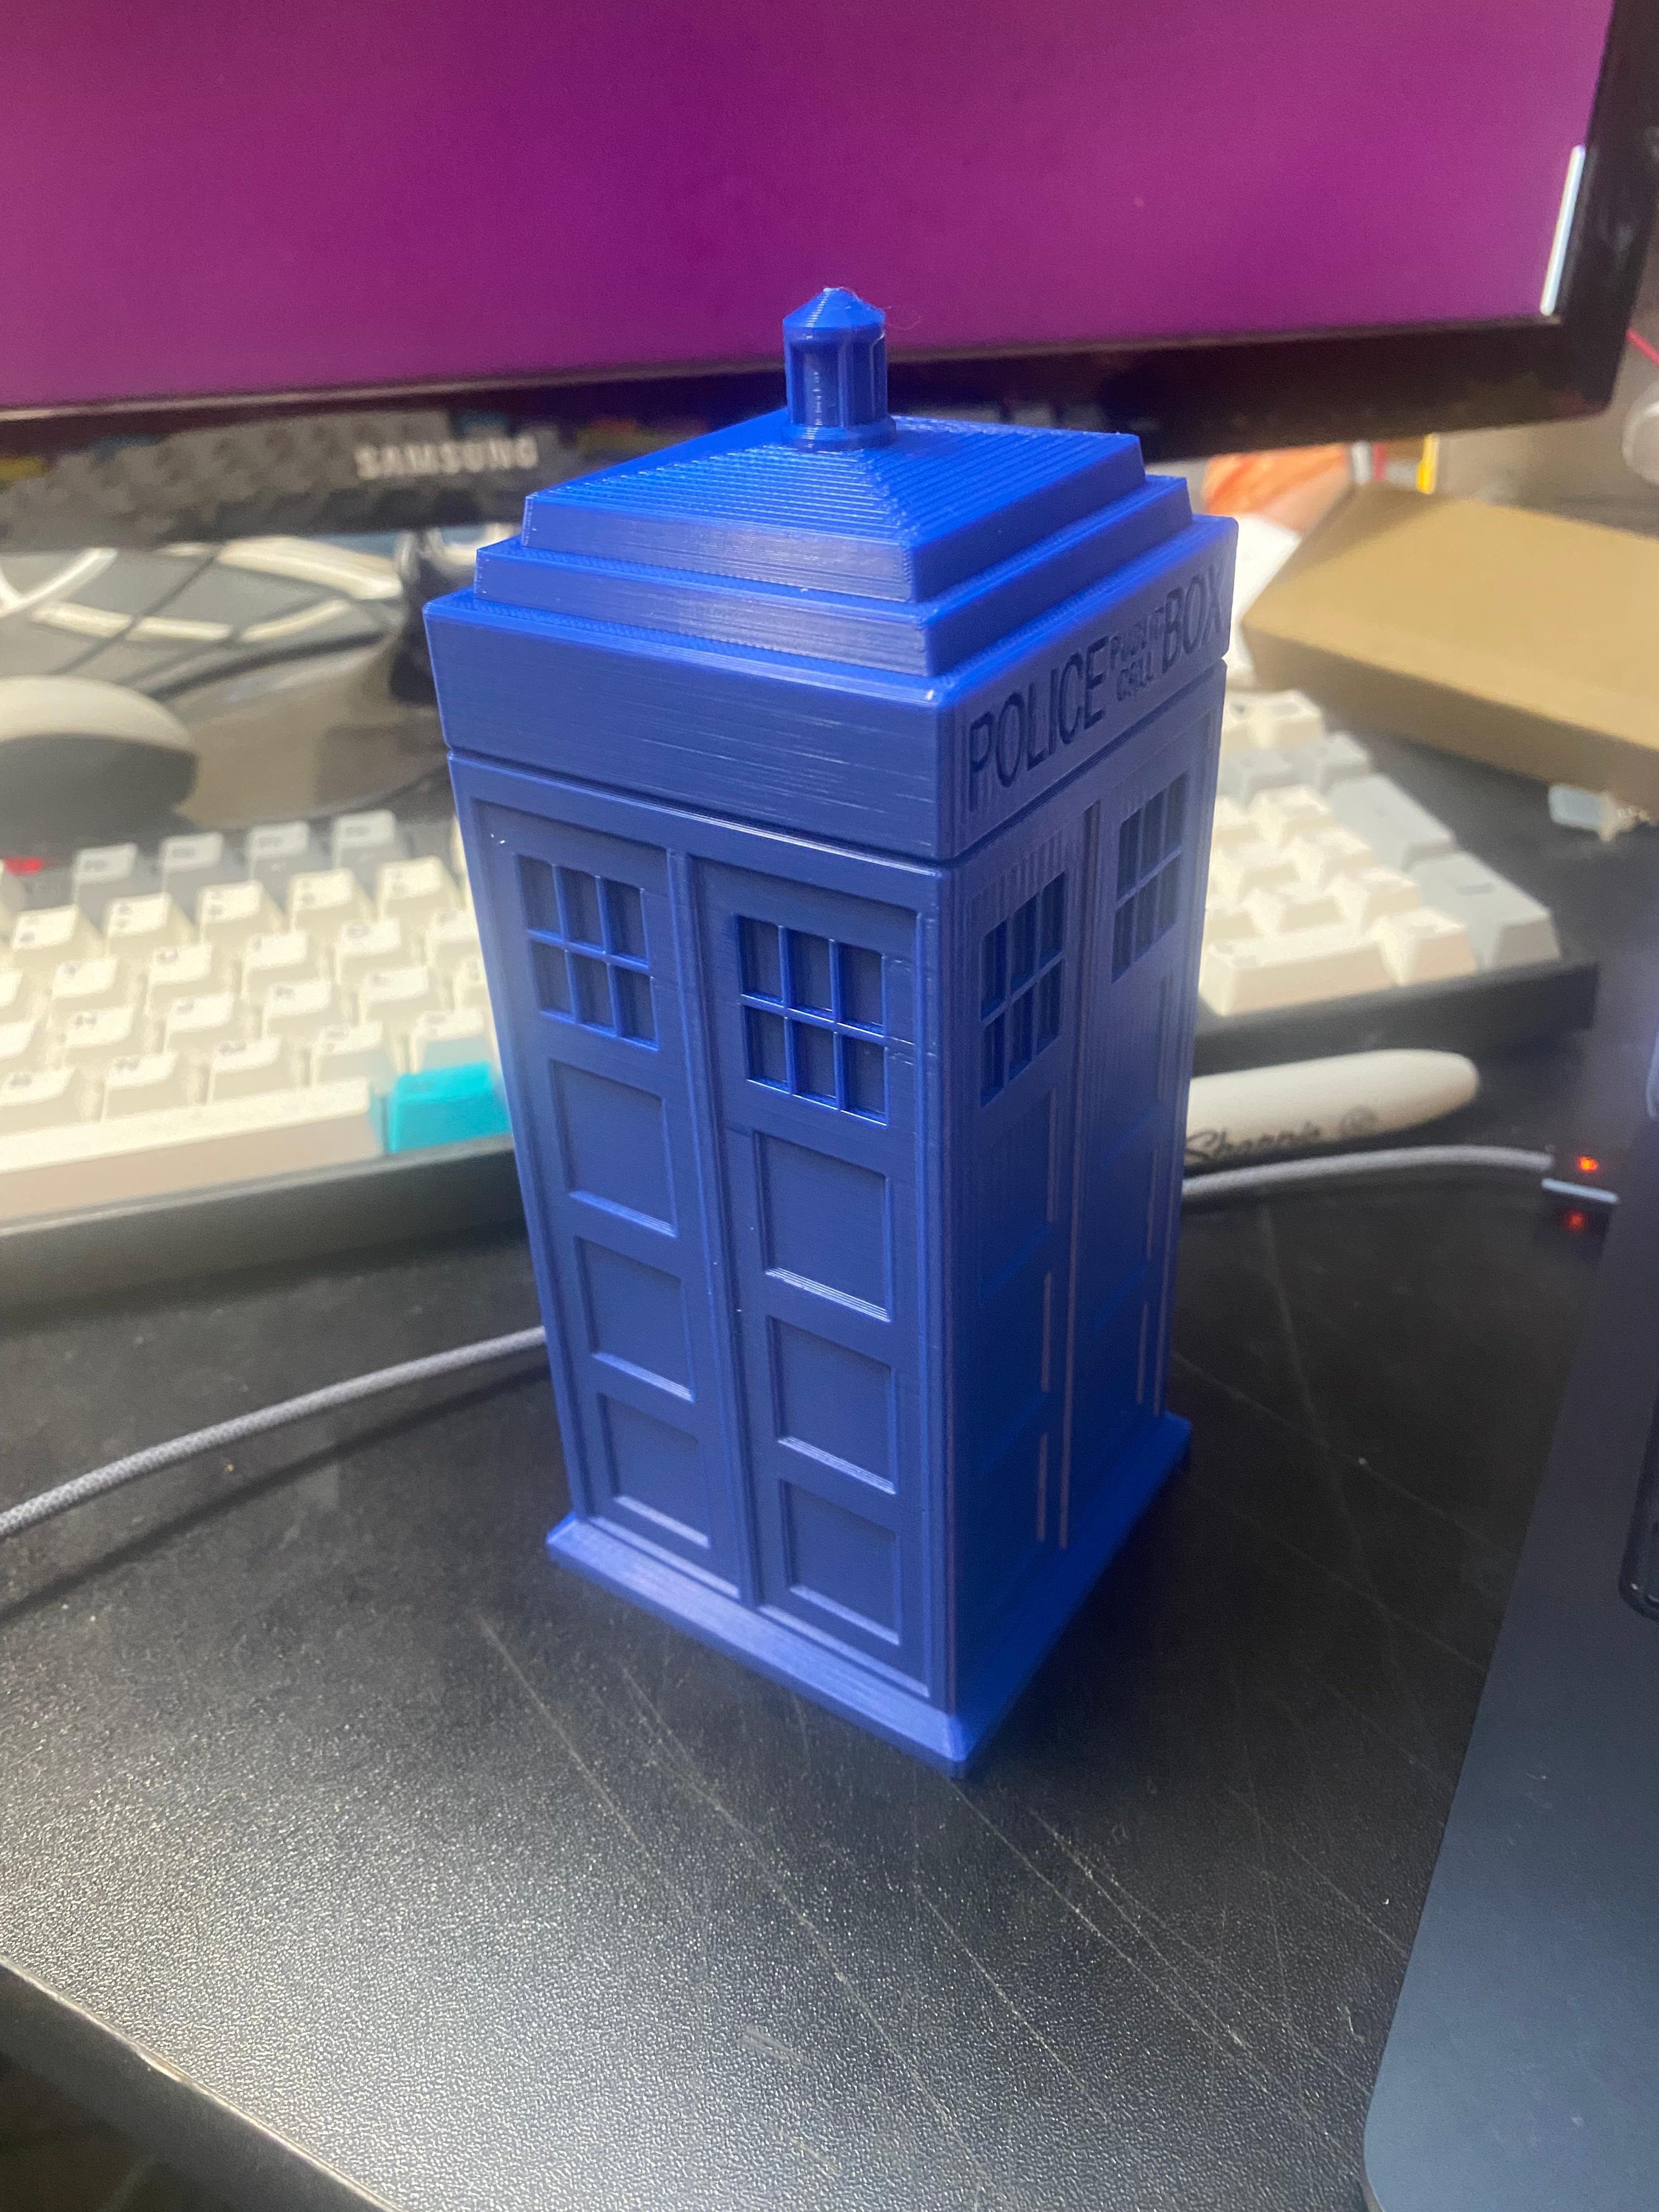 Print-in-Place Twisty Puzzle - TARDIS - came out beautifully, and works flawlessly - 3d model